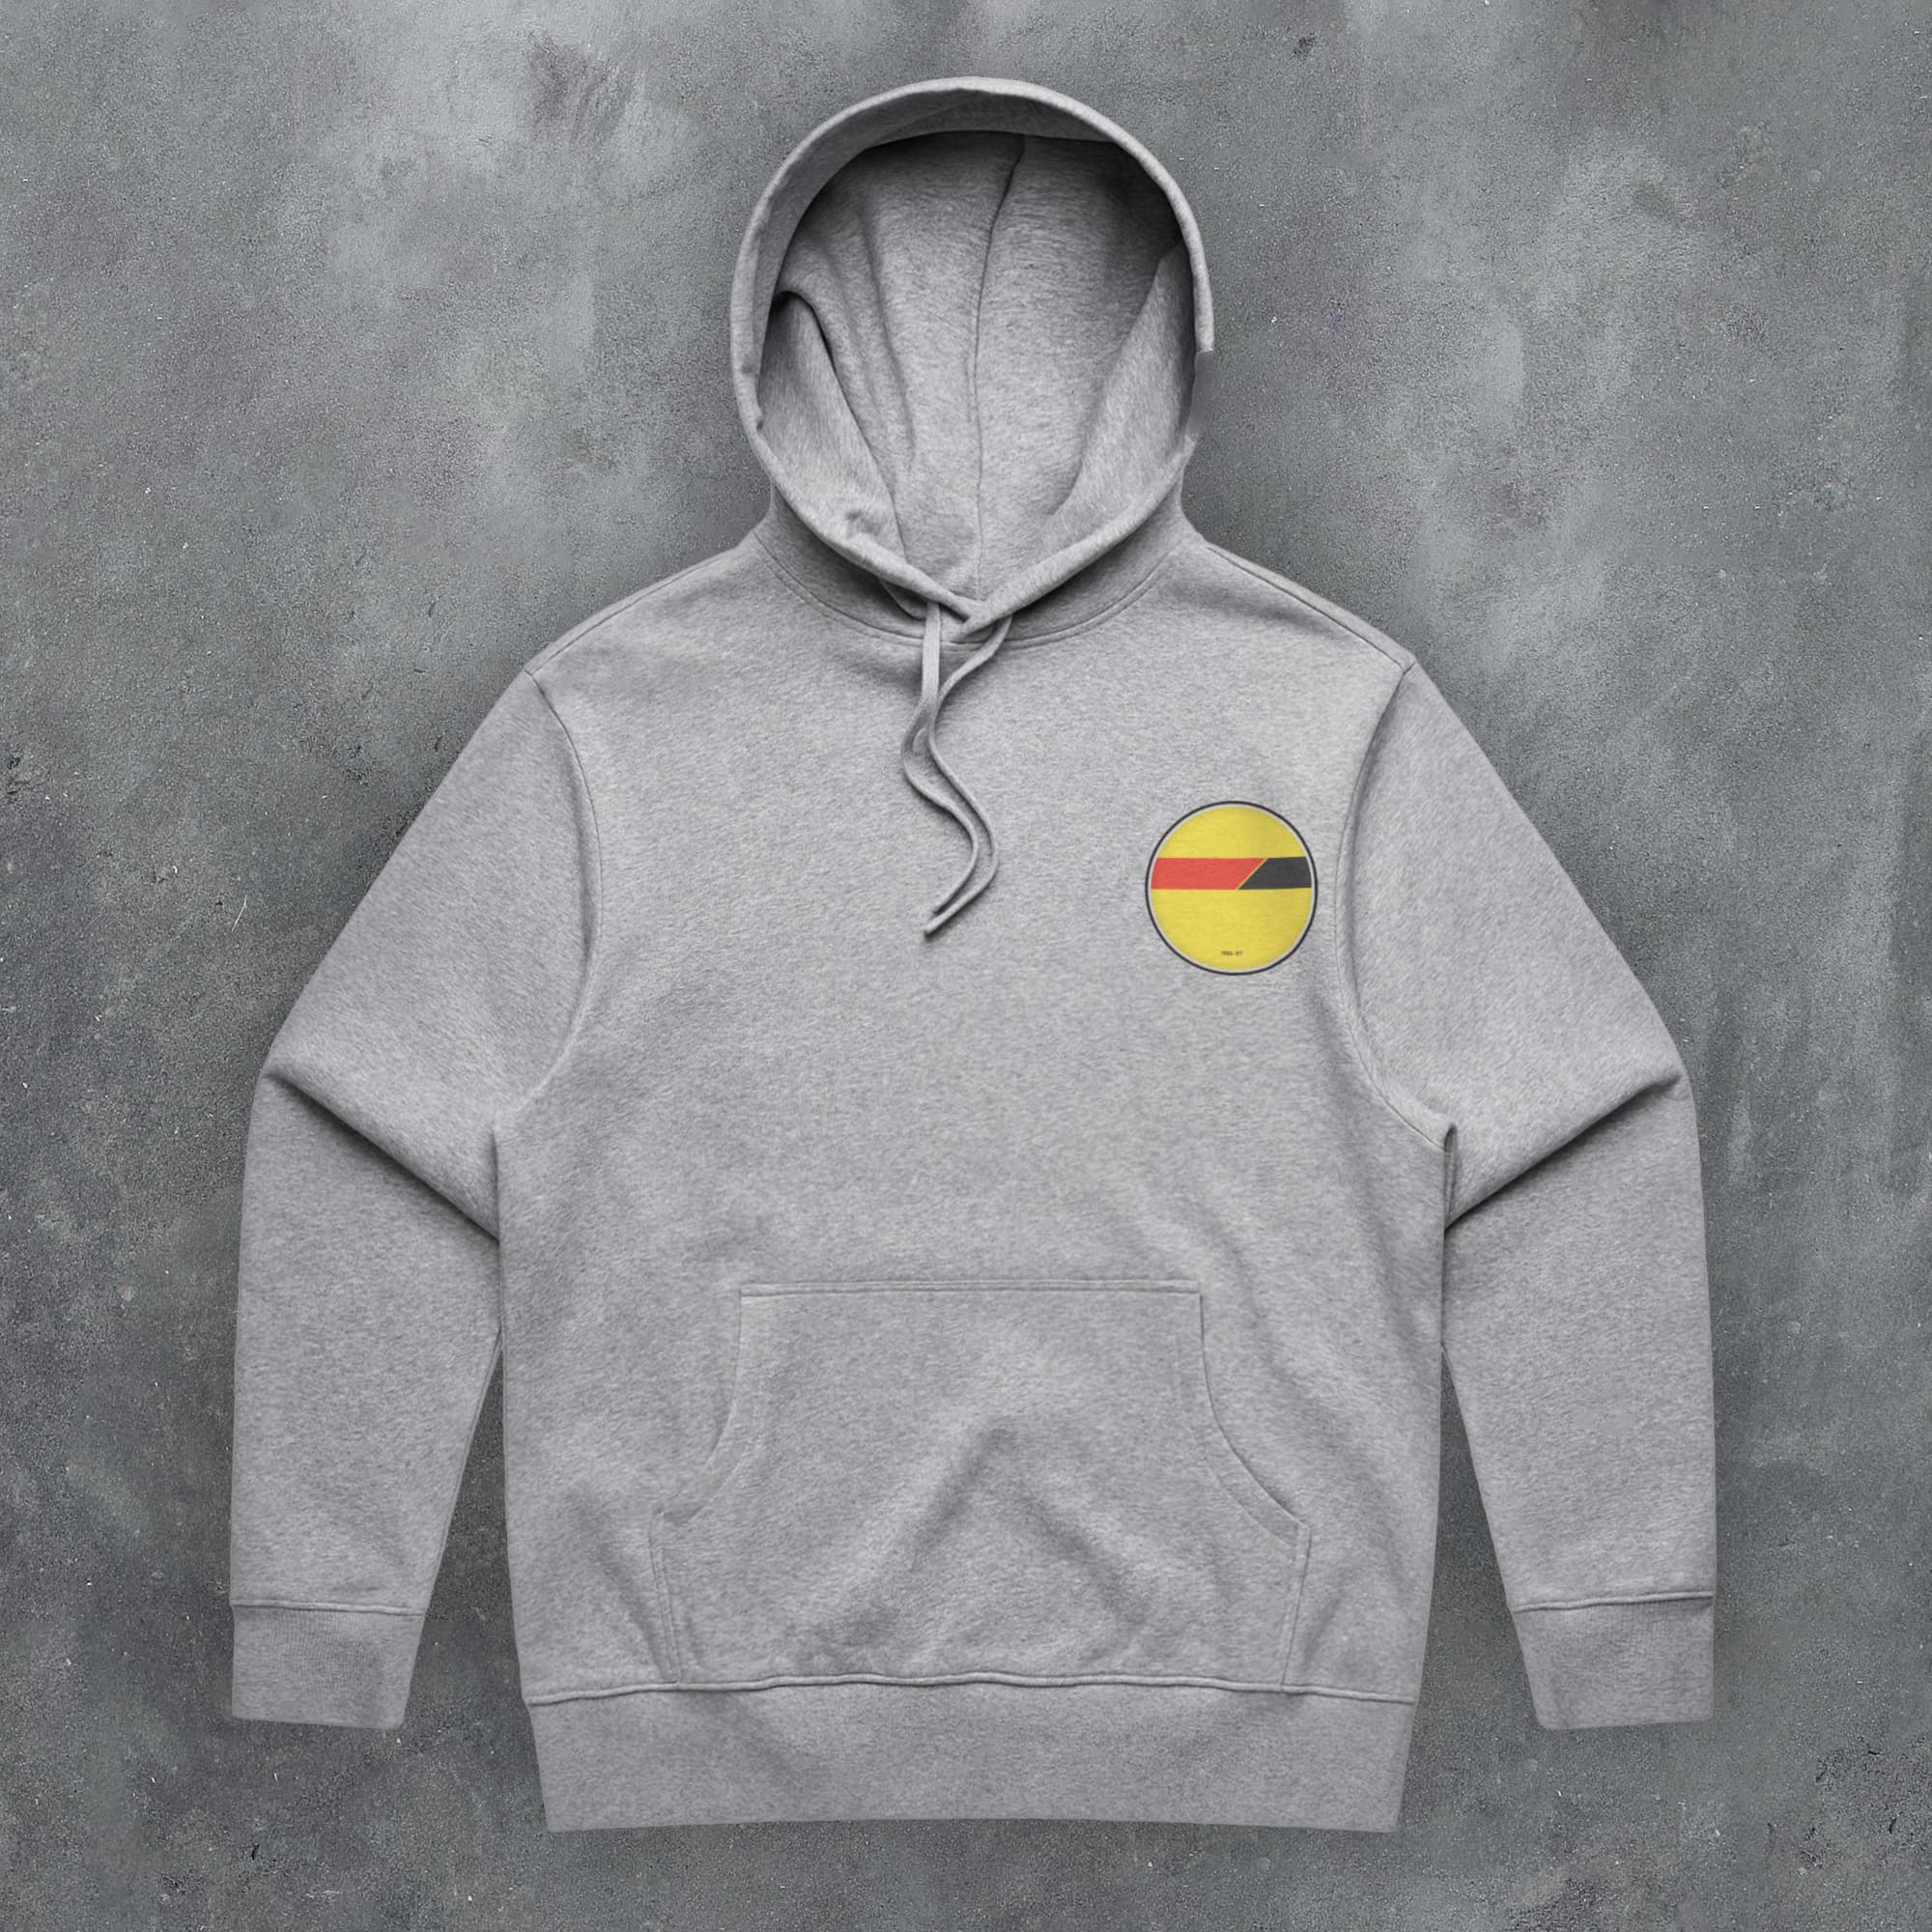 a grey sweatshirt with a yellow and red stripe on the chest